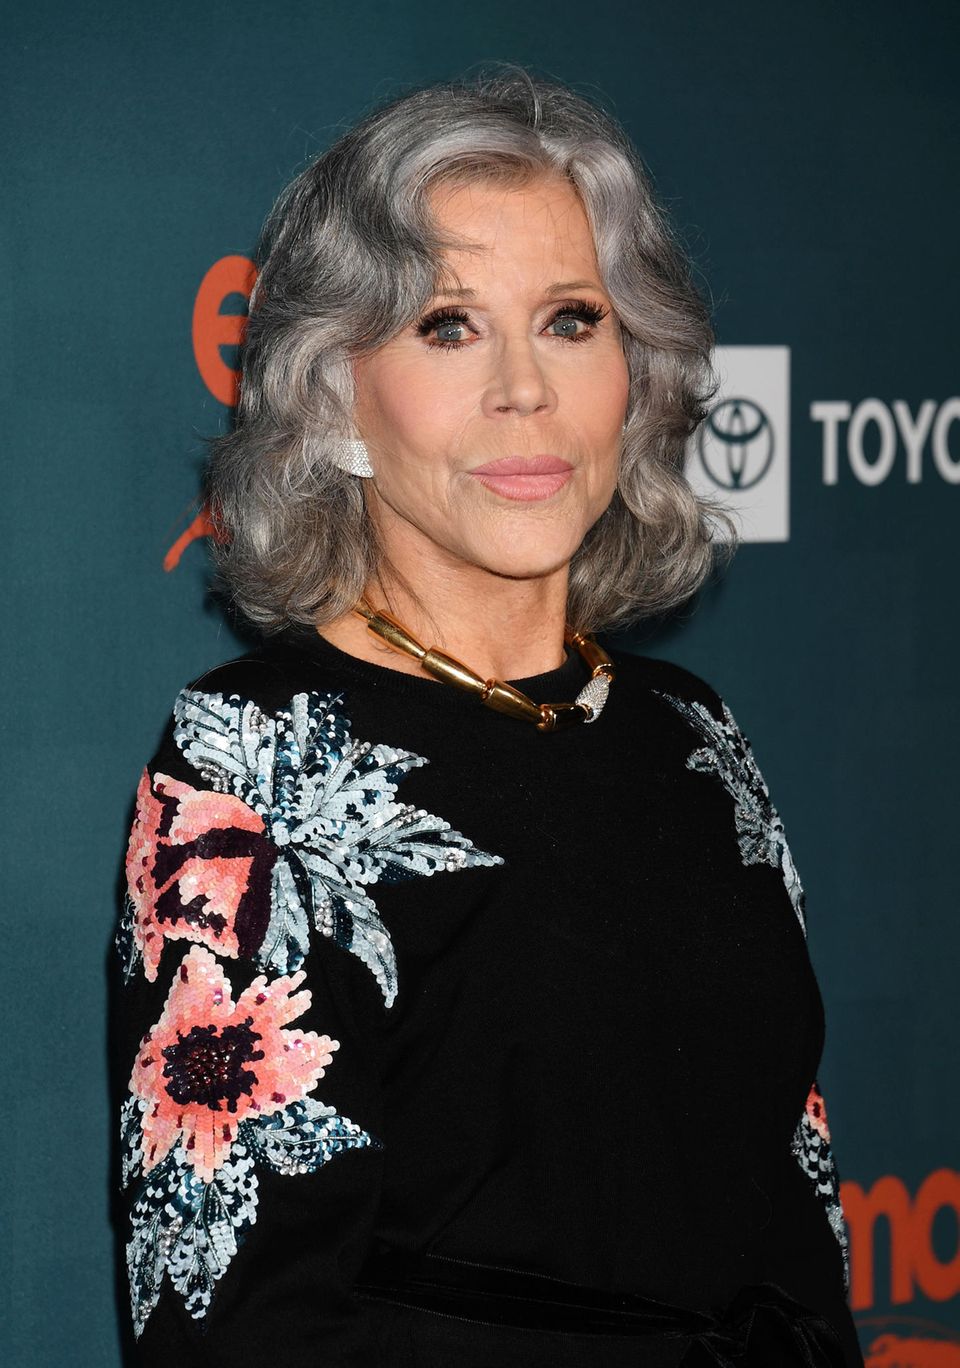 Jane Fonda wears her shoulder-length bob in big curls.  Layered hair falls slightly over her face, making the style appear looser.